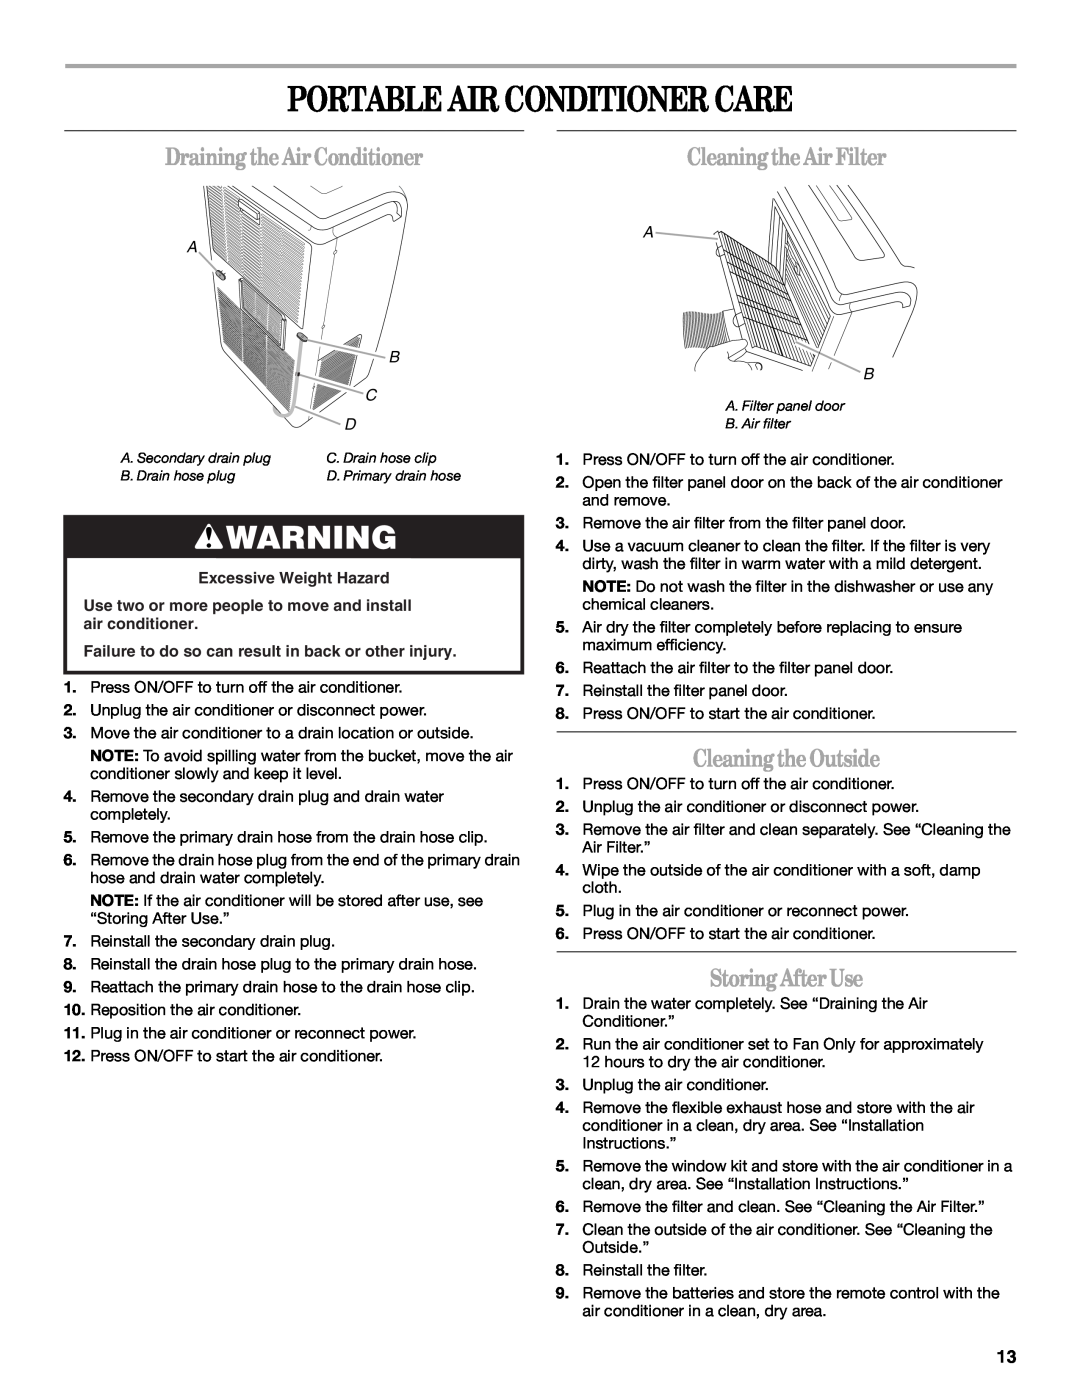 Whirlpool 1328891 manual Portable Air Conditioner Care, DrainingtheAirConditioner, CleaningtheOutside, StoringAfterUse 